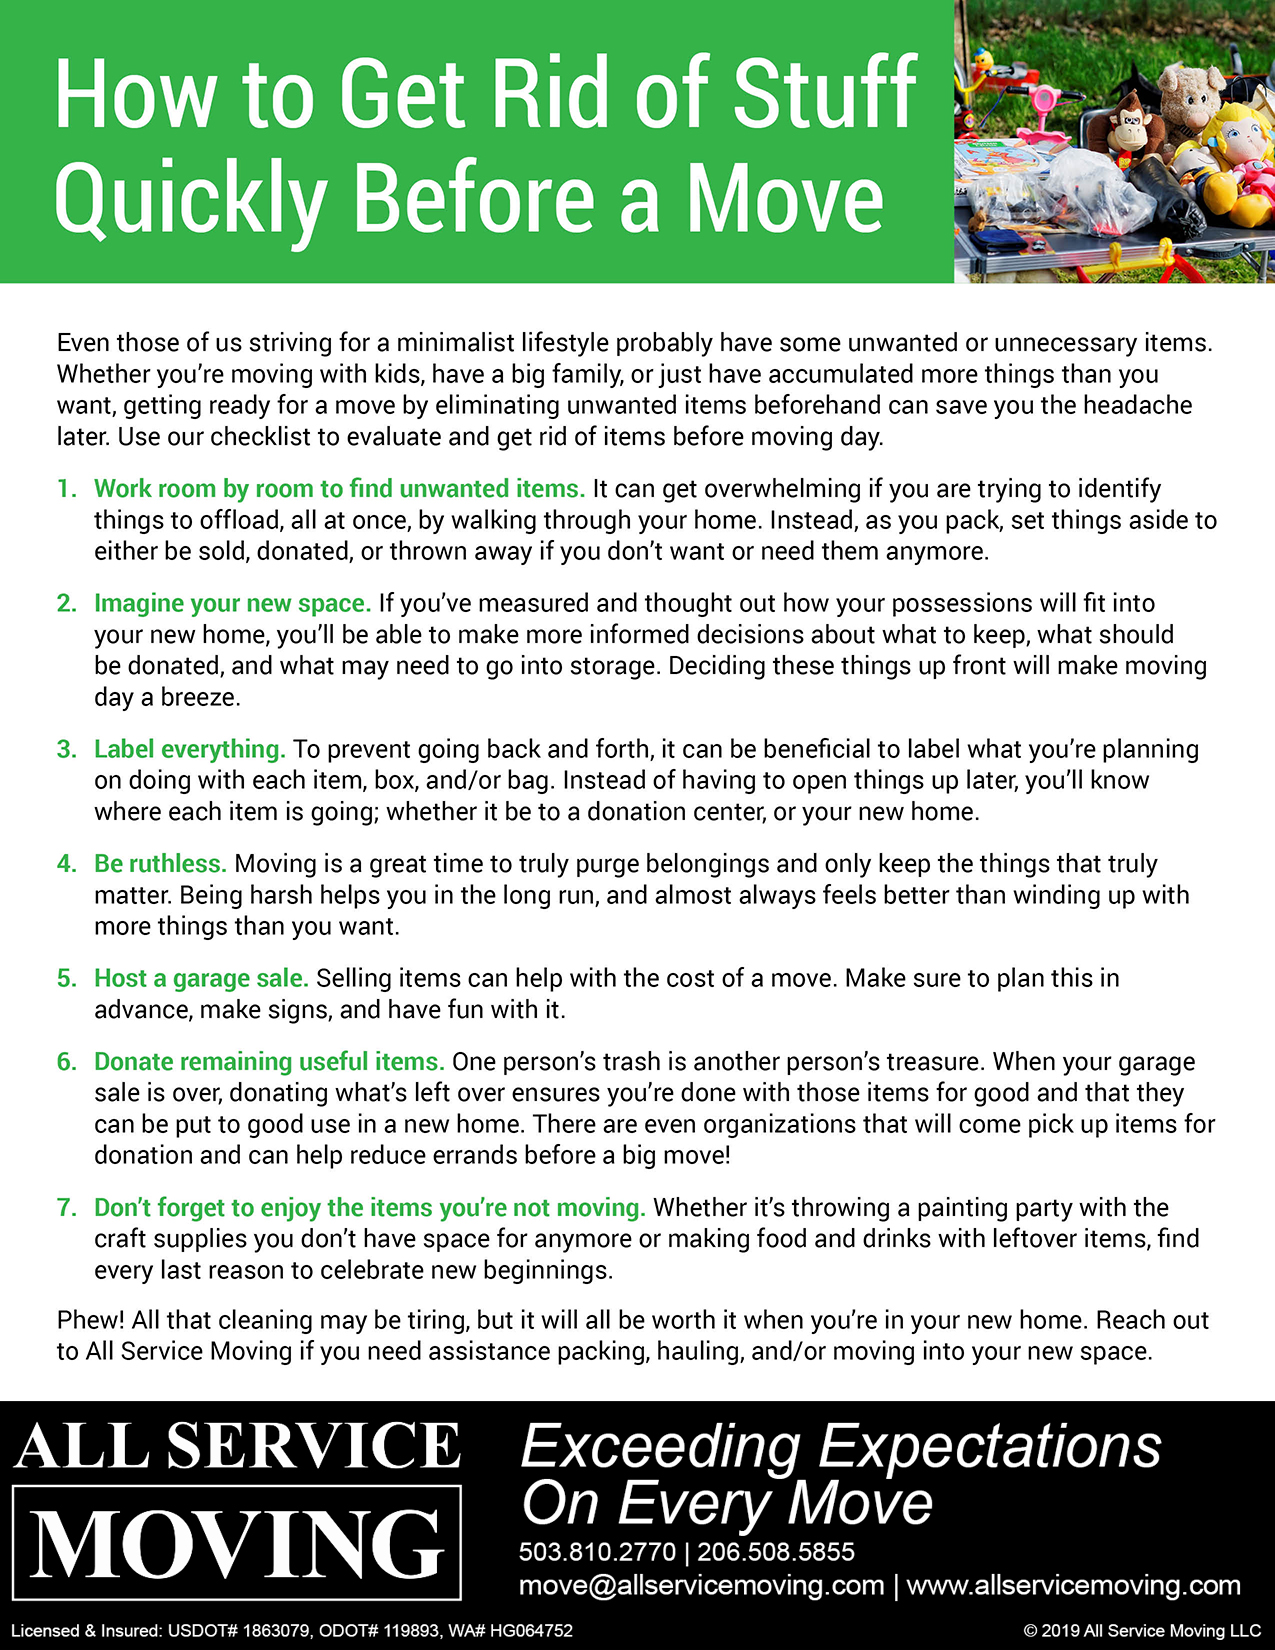 https://allservicemoving.com/wp-content/uploads/2019/11/AllServiceMoving-How-to-Get-Rid-of-Stuff-Quickly-Before-a-Move.jpg